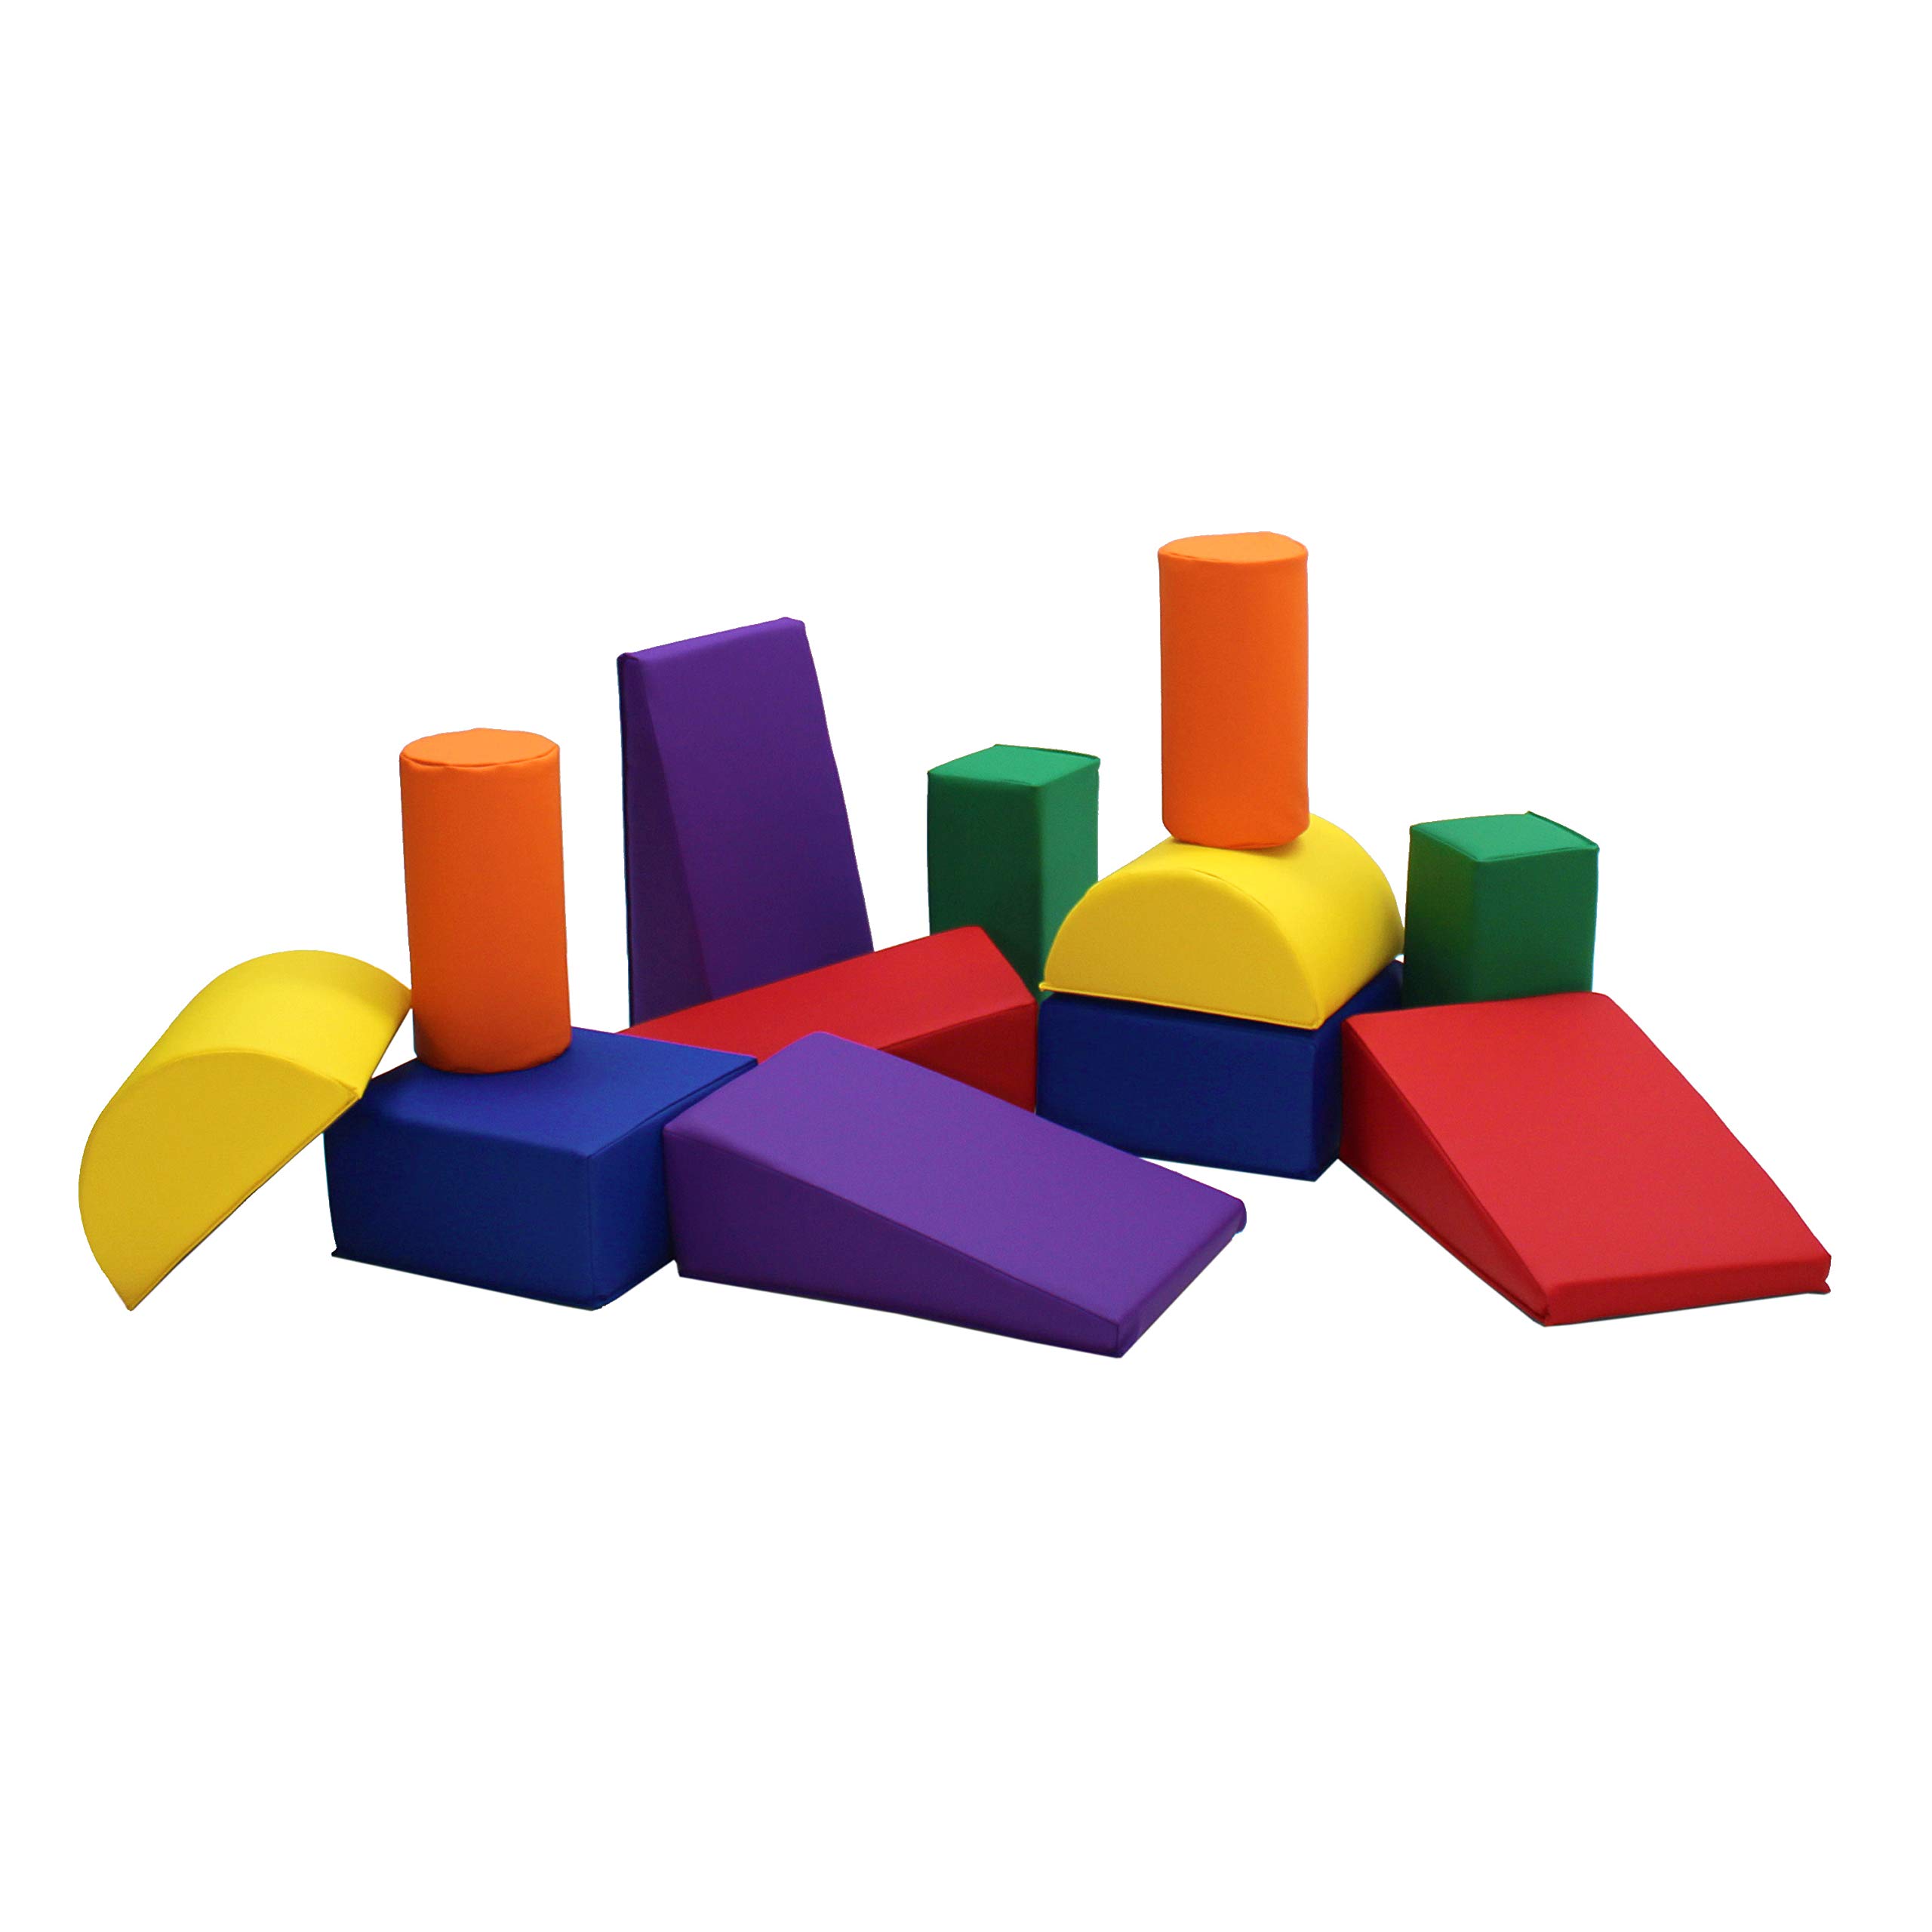 Factory Direct Partners 12273-AS SoftScape Toddler Builder Set, Colorful Soft Foam Playtime Building Blocks for Infants and Kids (12-Piece Set) - Assorted